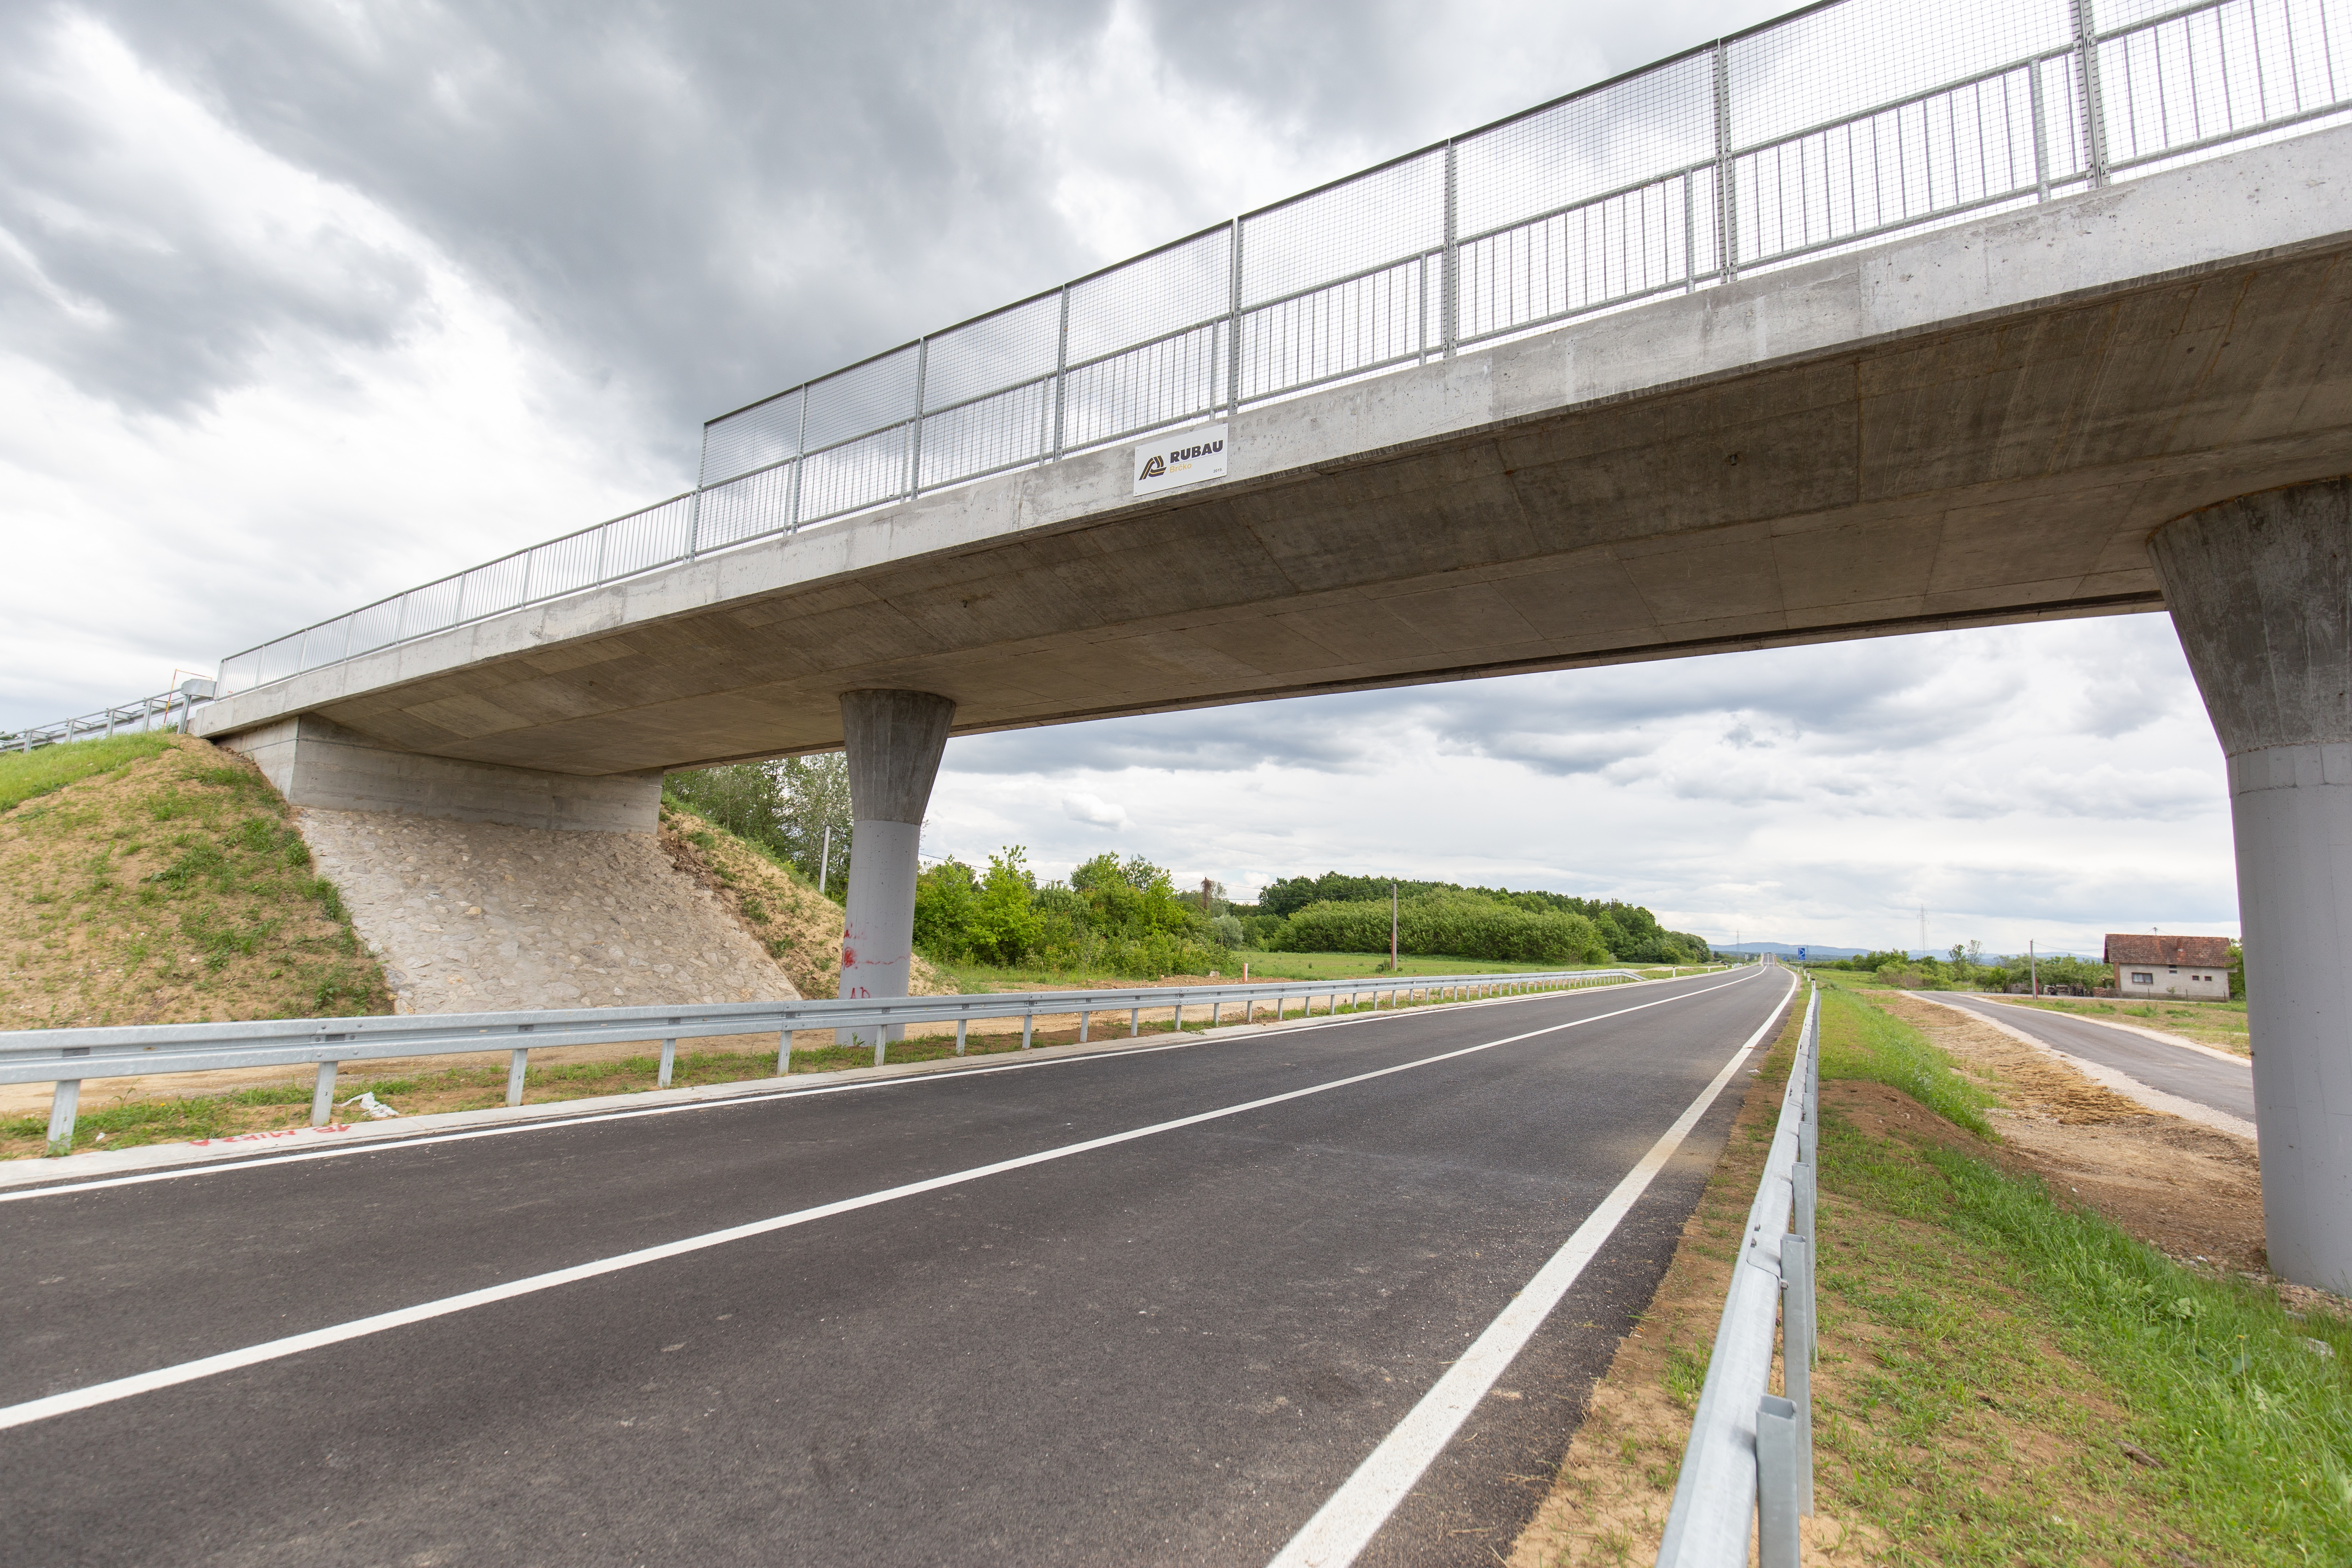 A new recently built highway in Brcko district, Bosnia and Herzegovina. The road was built by Spanish company Rubau and is important for the region